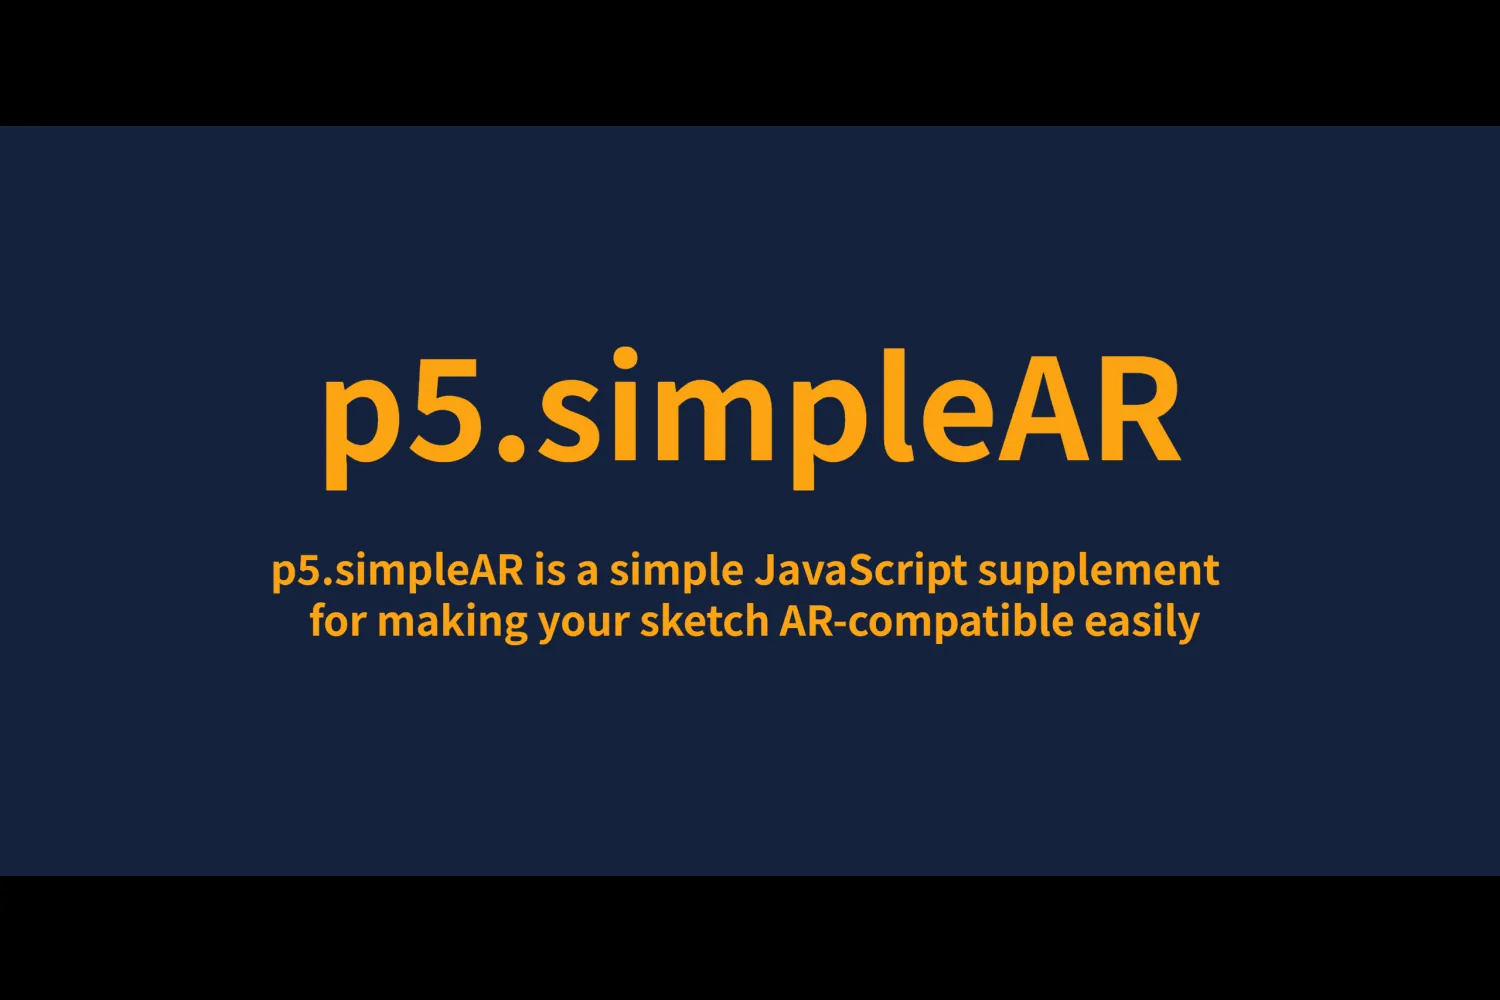 A logo and description of 'p5.simpleAR' library are placed in the center.